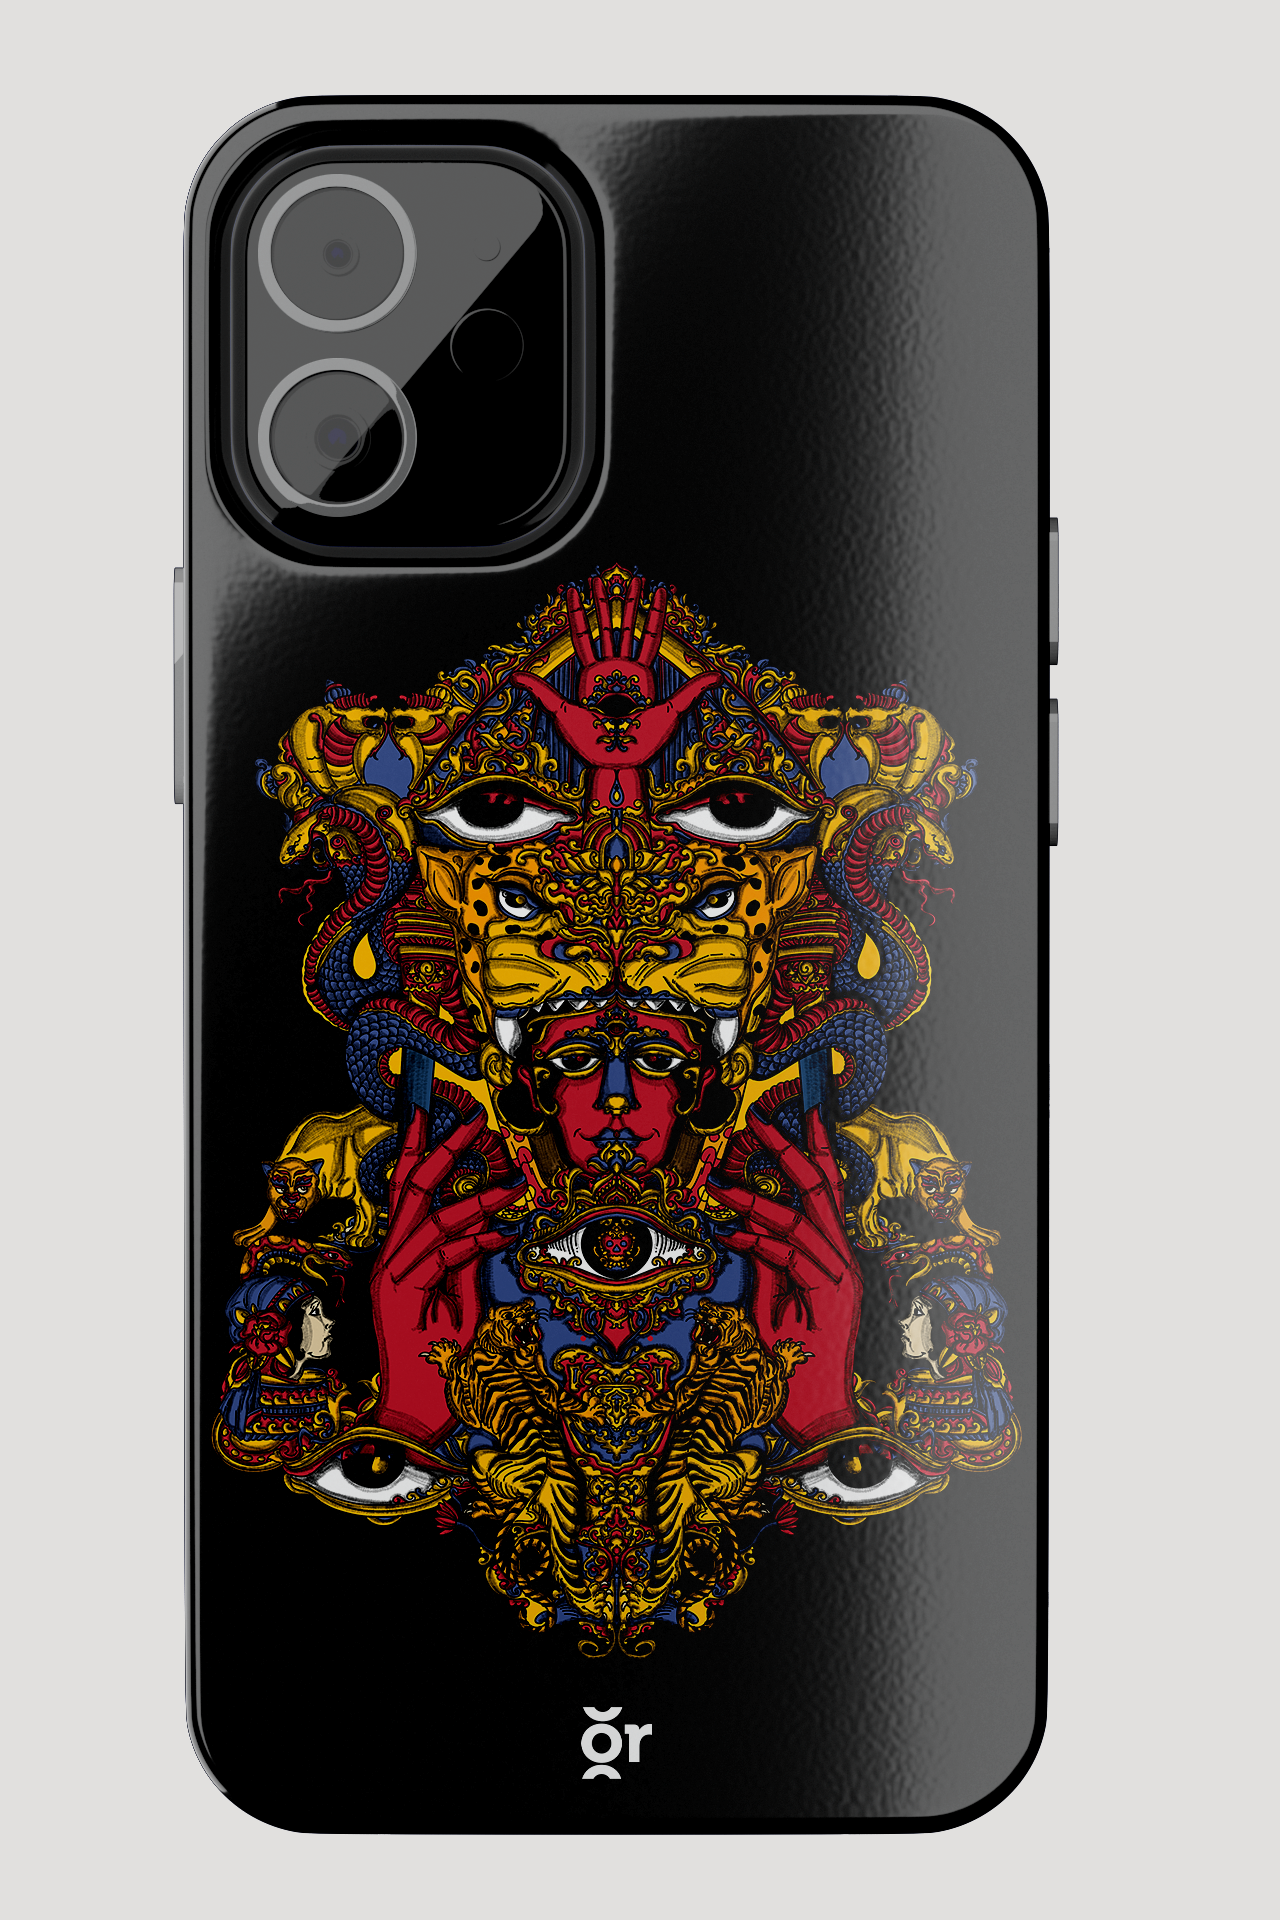 MOBILE CASE COVER: PATTERN 5